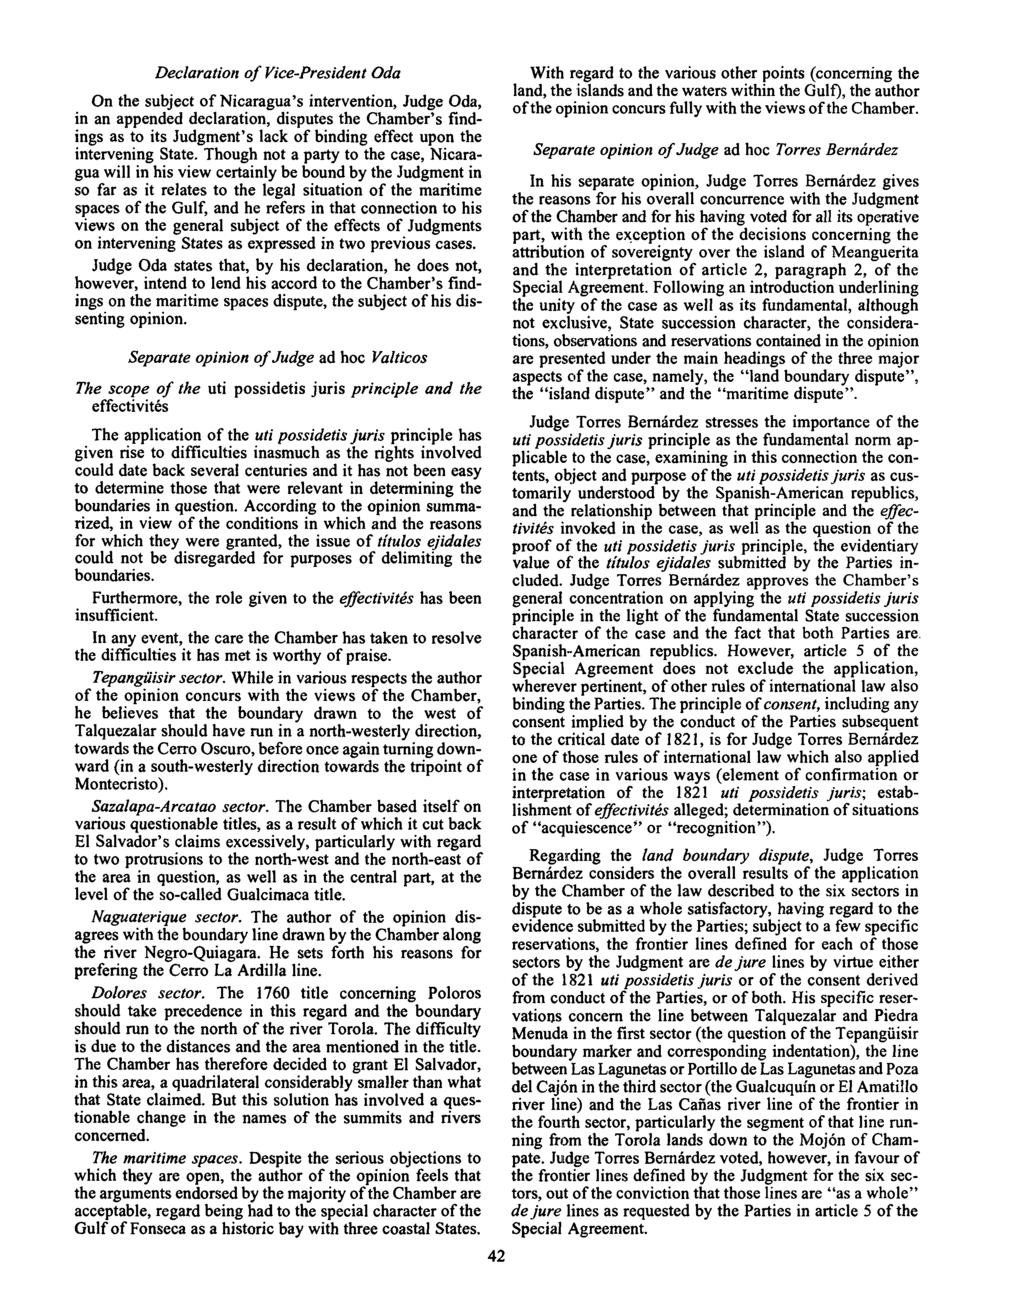 Declaration of Vice-President Oda On the subject of Nicaragua's intervention, Judge Oda, in an appended declaration, disputes the Chamber's findings as to its Judgment's lack of binding effect upon